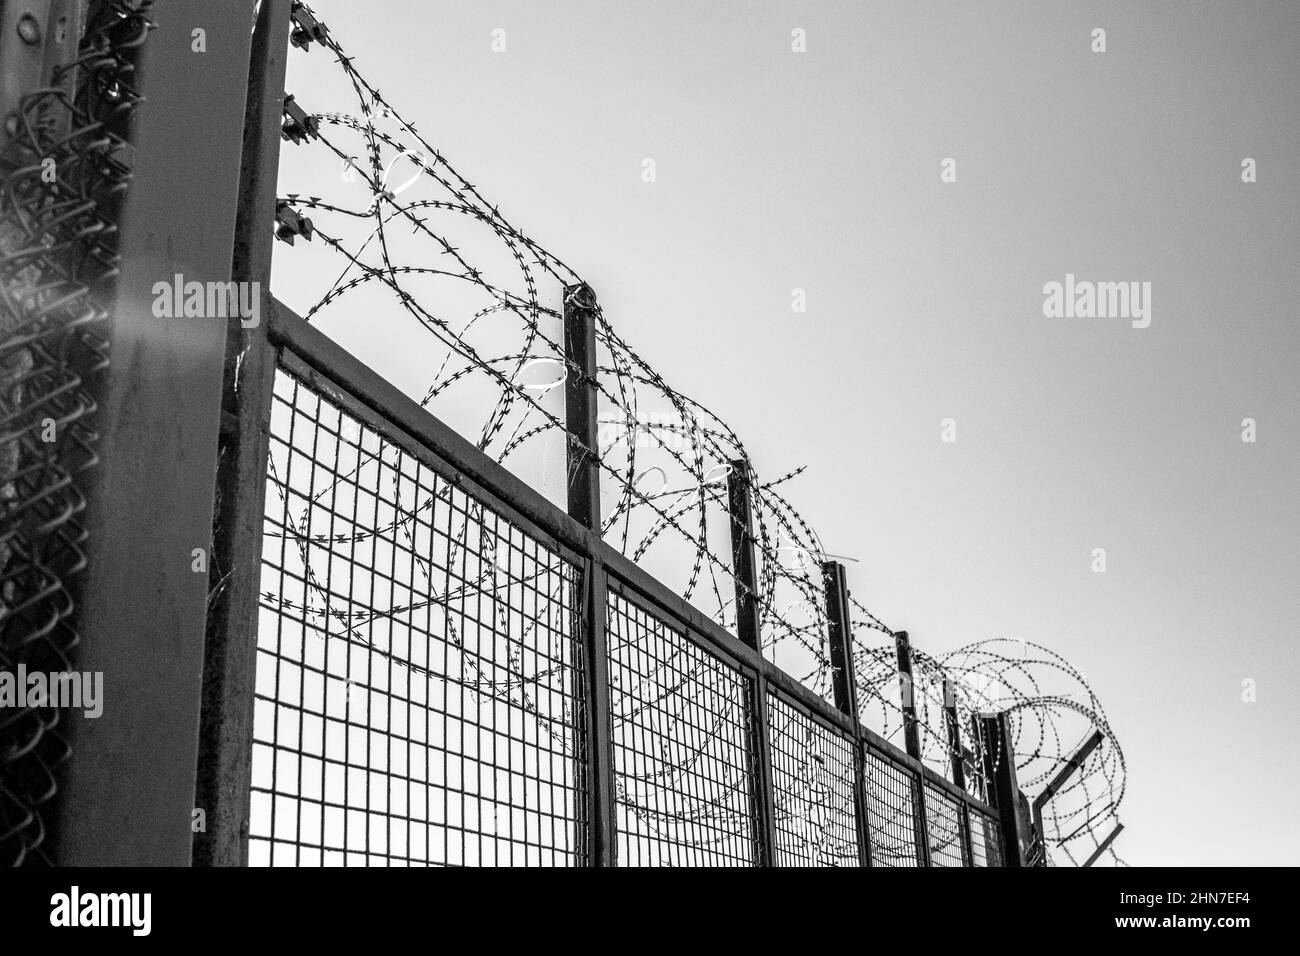 Military installation barbed wire fence. Monochrome image. Cold War. Conflict. secure area, keep out. Restricted area. Stock Photo